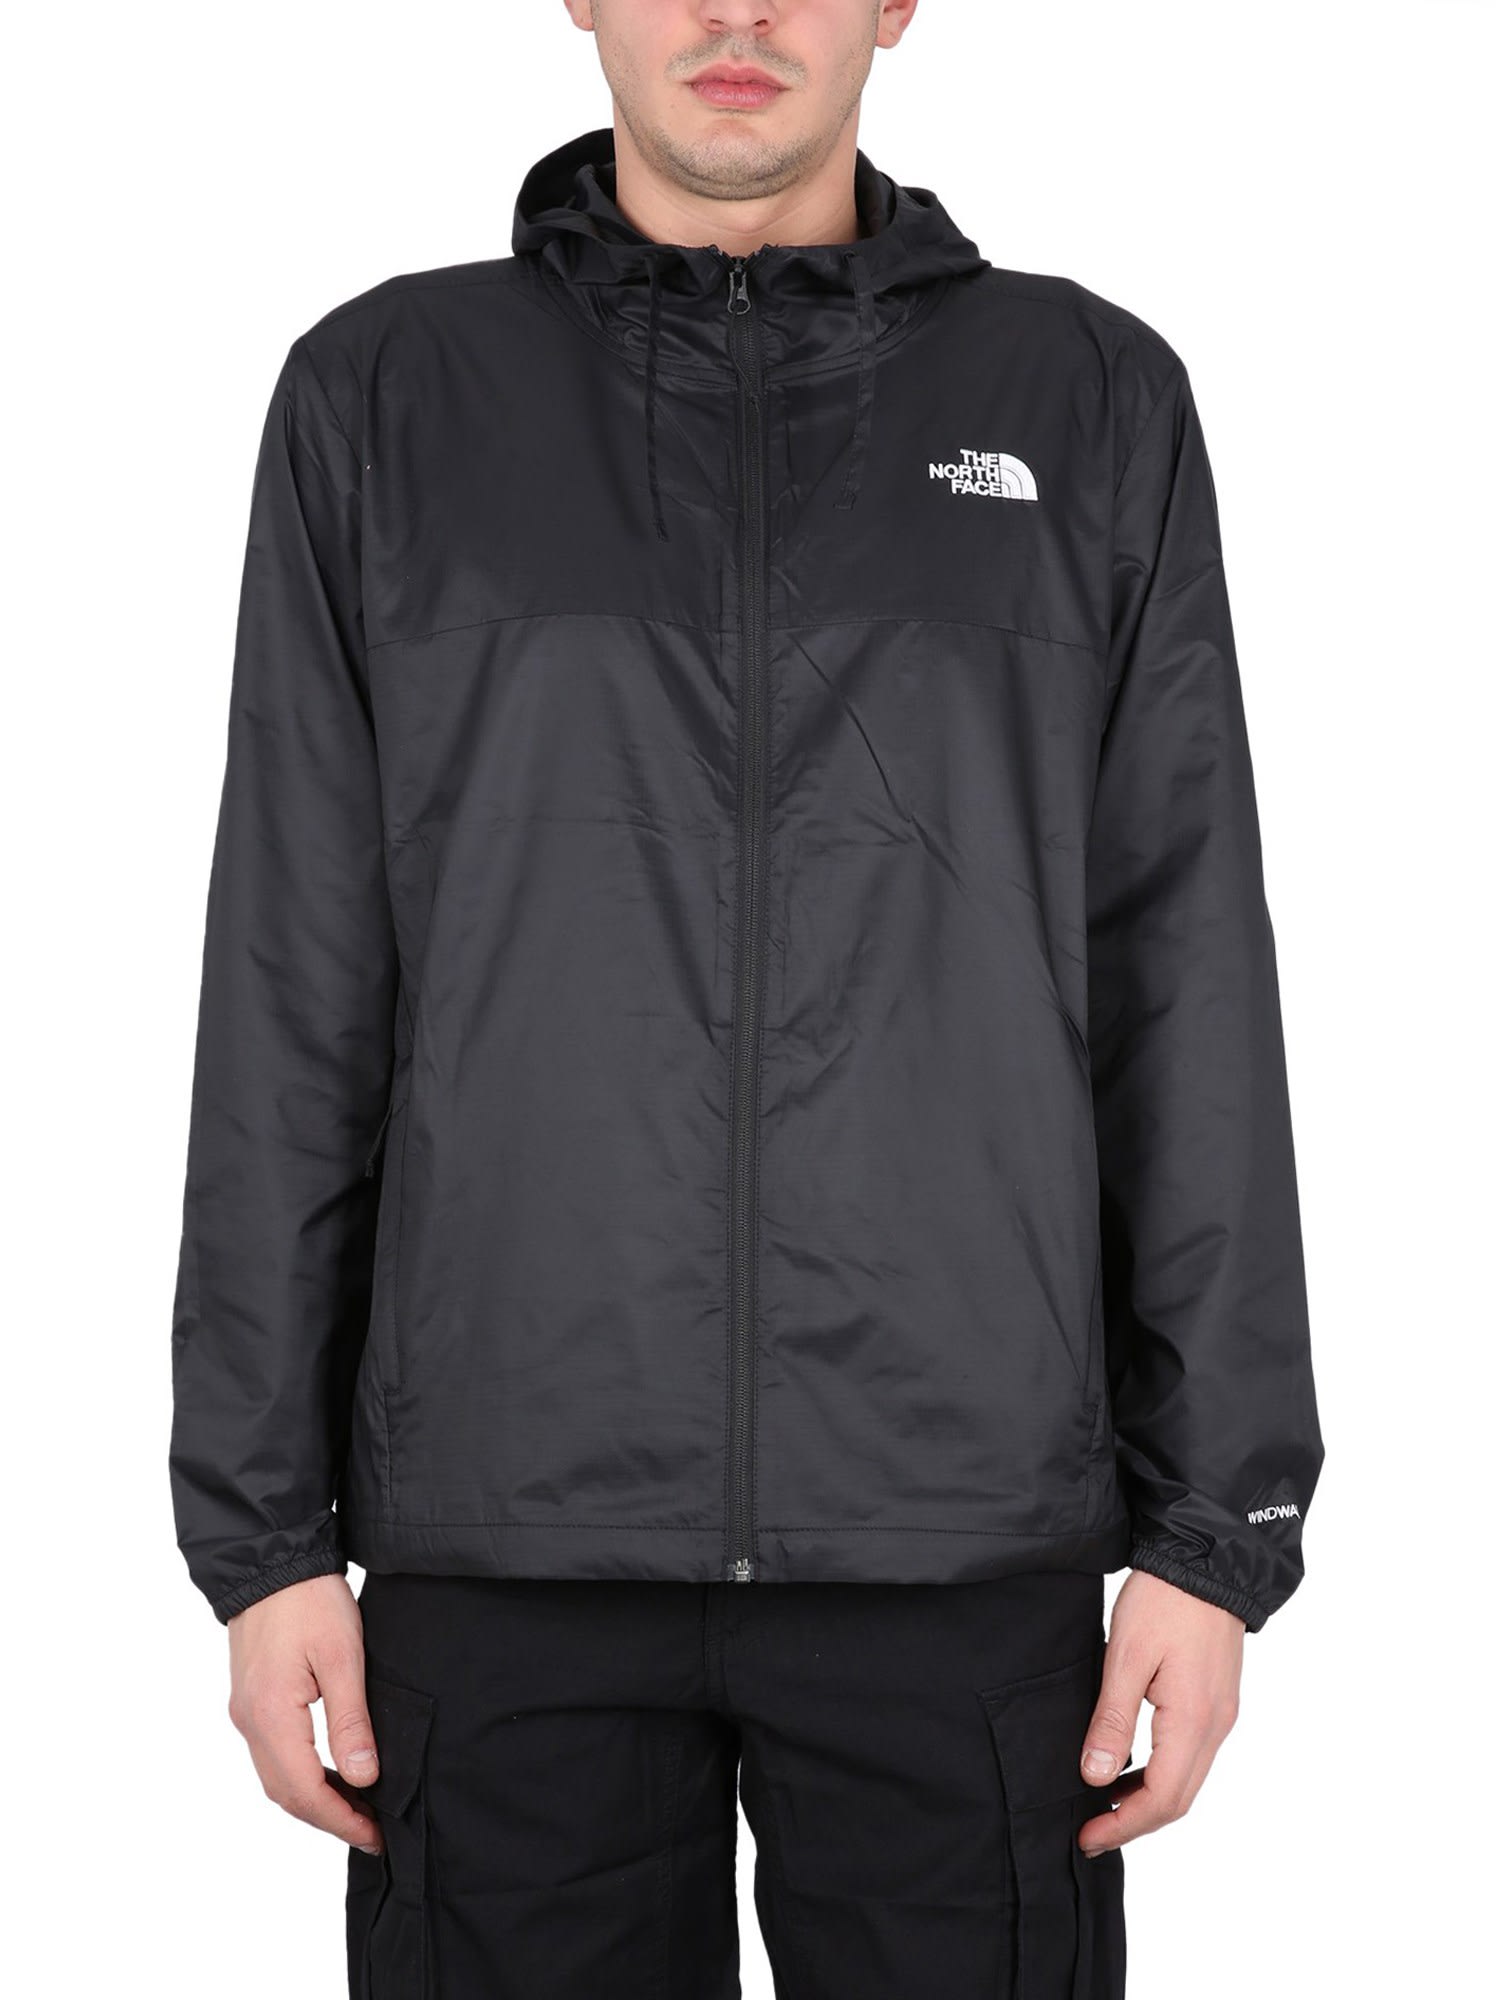 THE NORTH FACE JACKET WITH LOGO PRINT